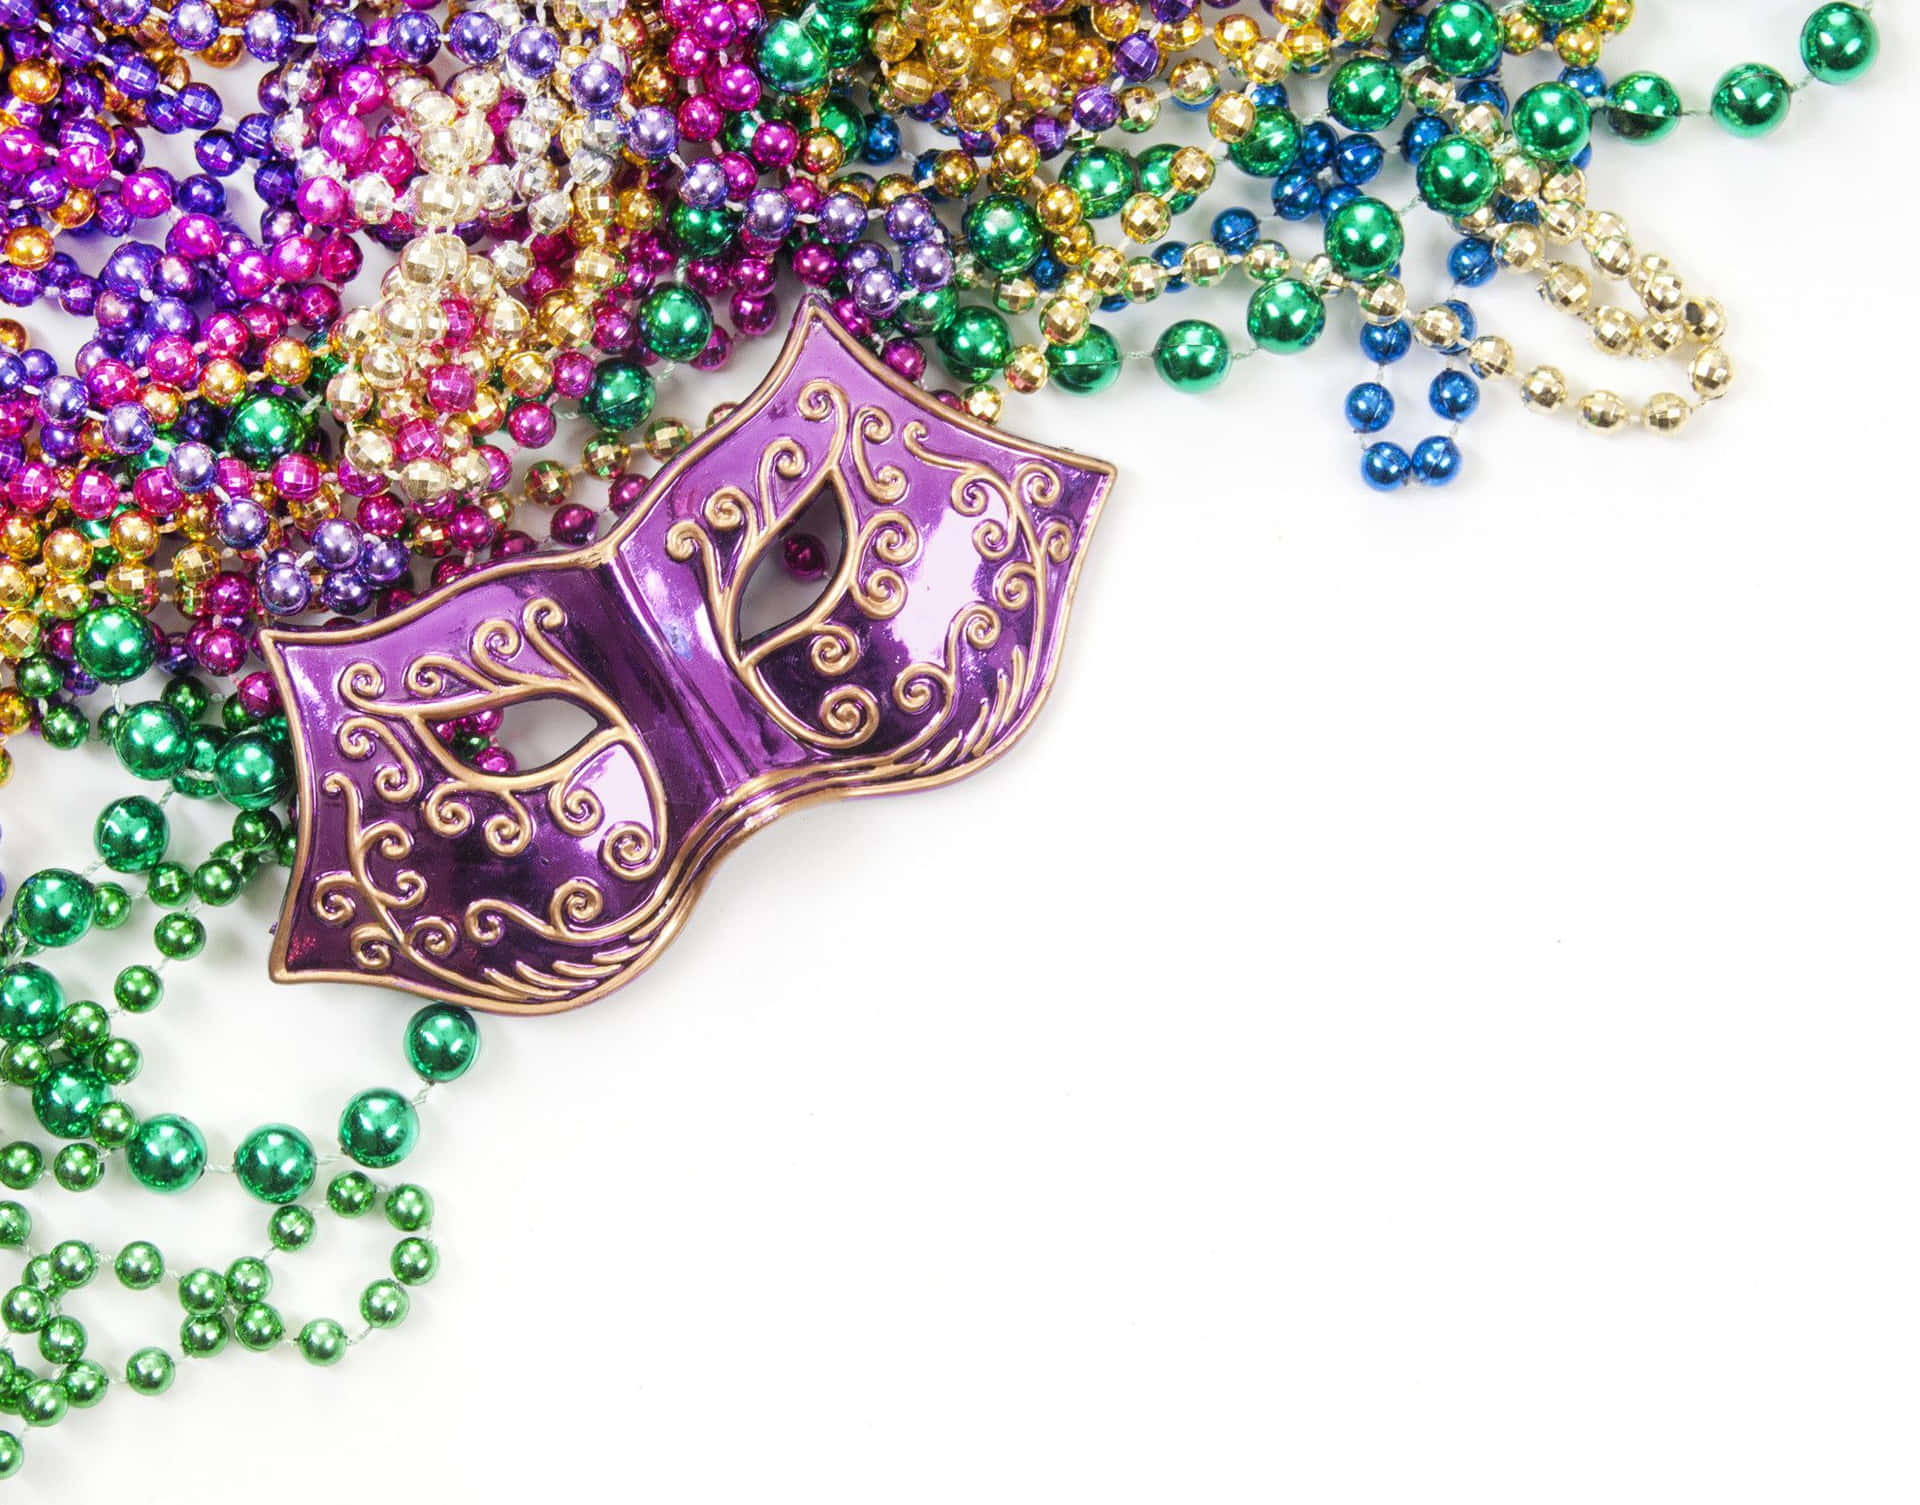 Mardi Gras Mask With Colorful Beads Jewelry